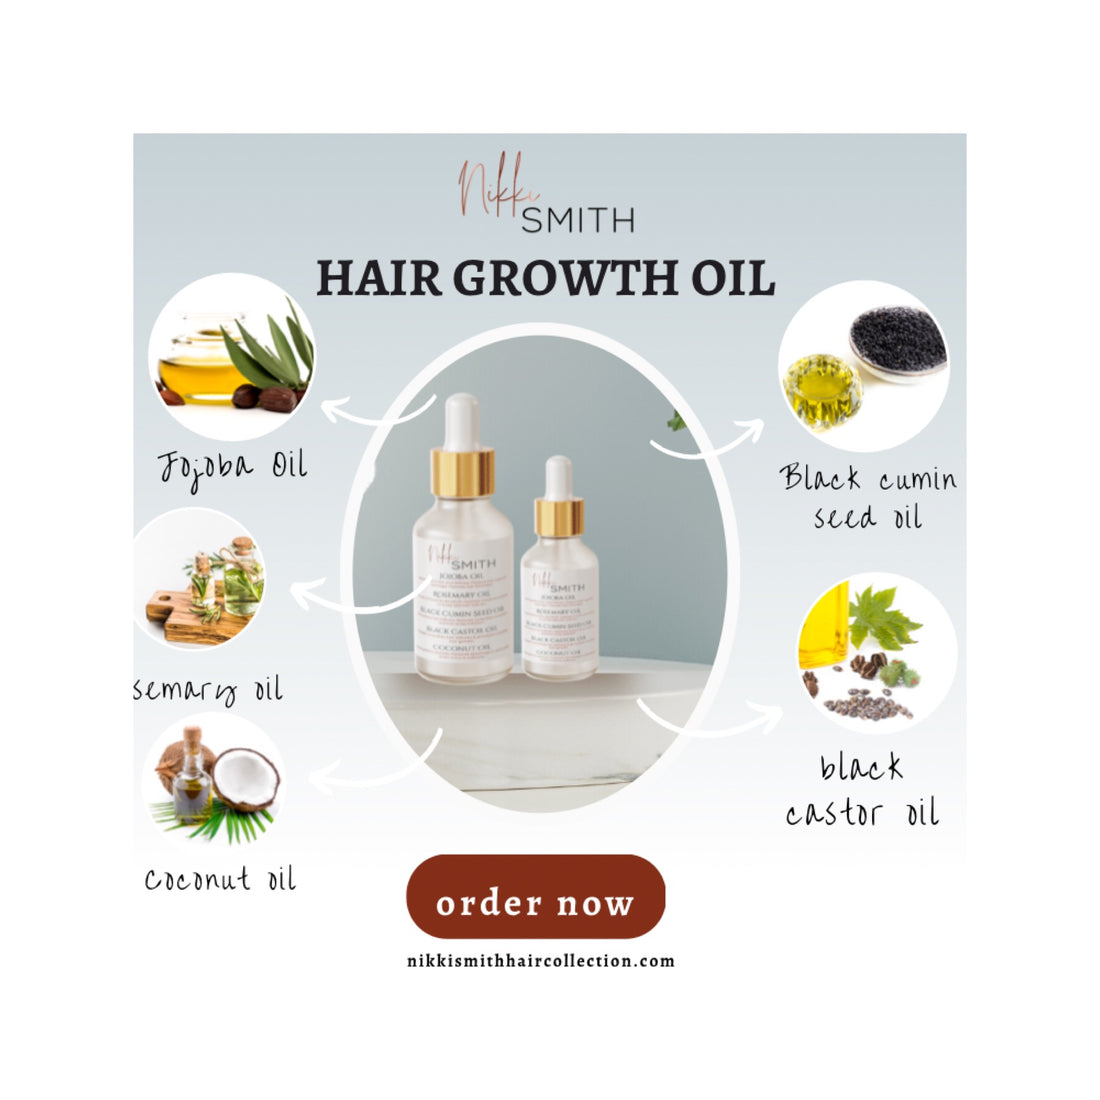 How To Use The Hair Growth Oil The Right Way?